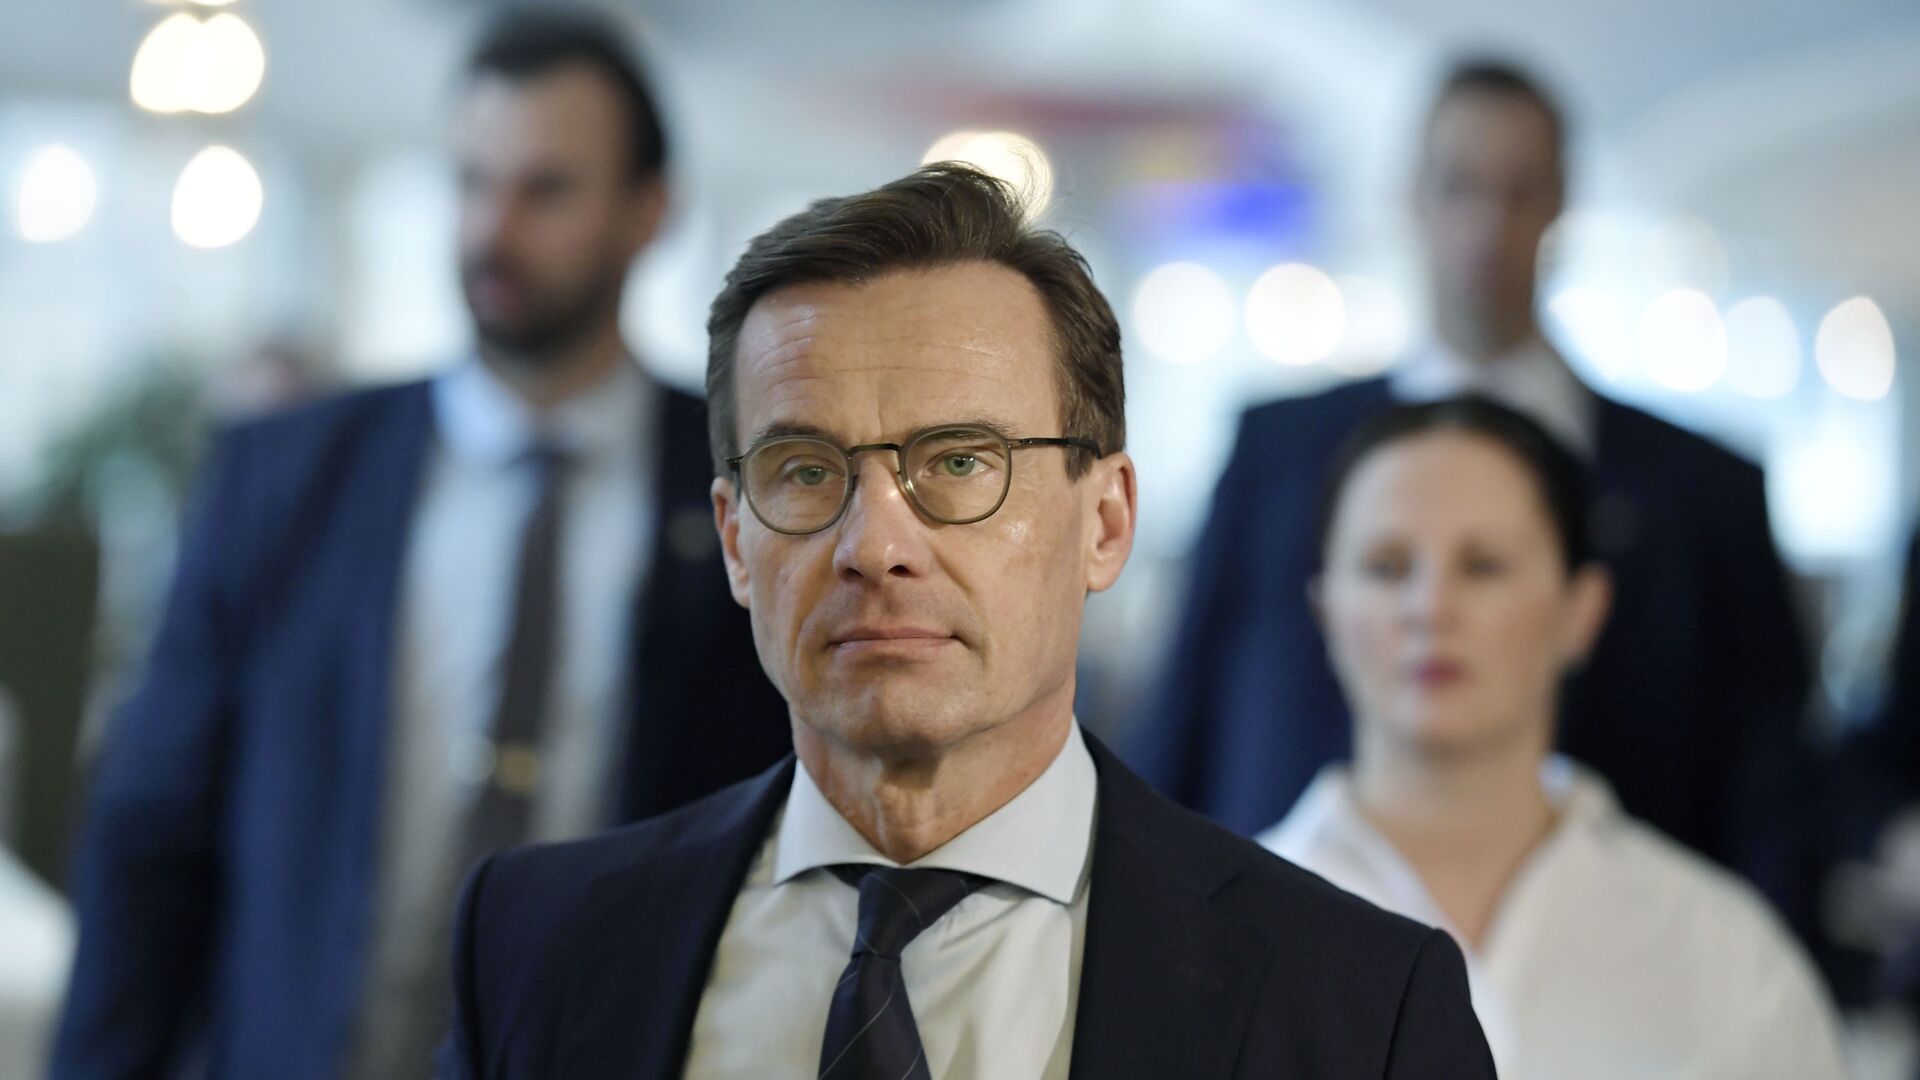 Ulf Kristersson, leader of the center-right party Moderates, makes his way to a press meeting in the Riksdag, Stockholm, Wednesday Nov. 14, 2018 - Sputnik International, 1920, 05.07.2022